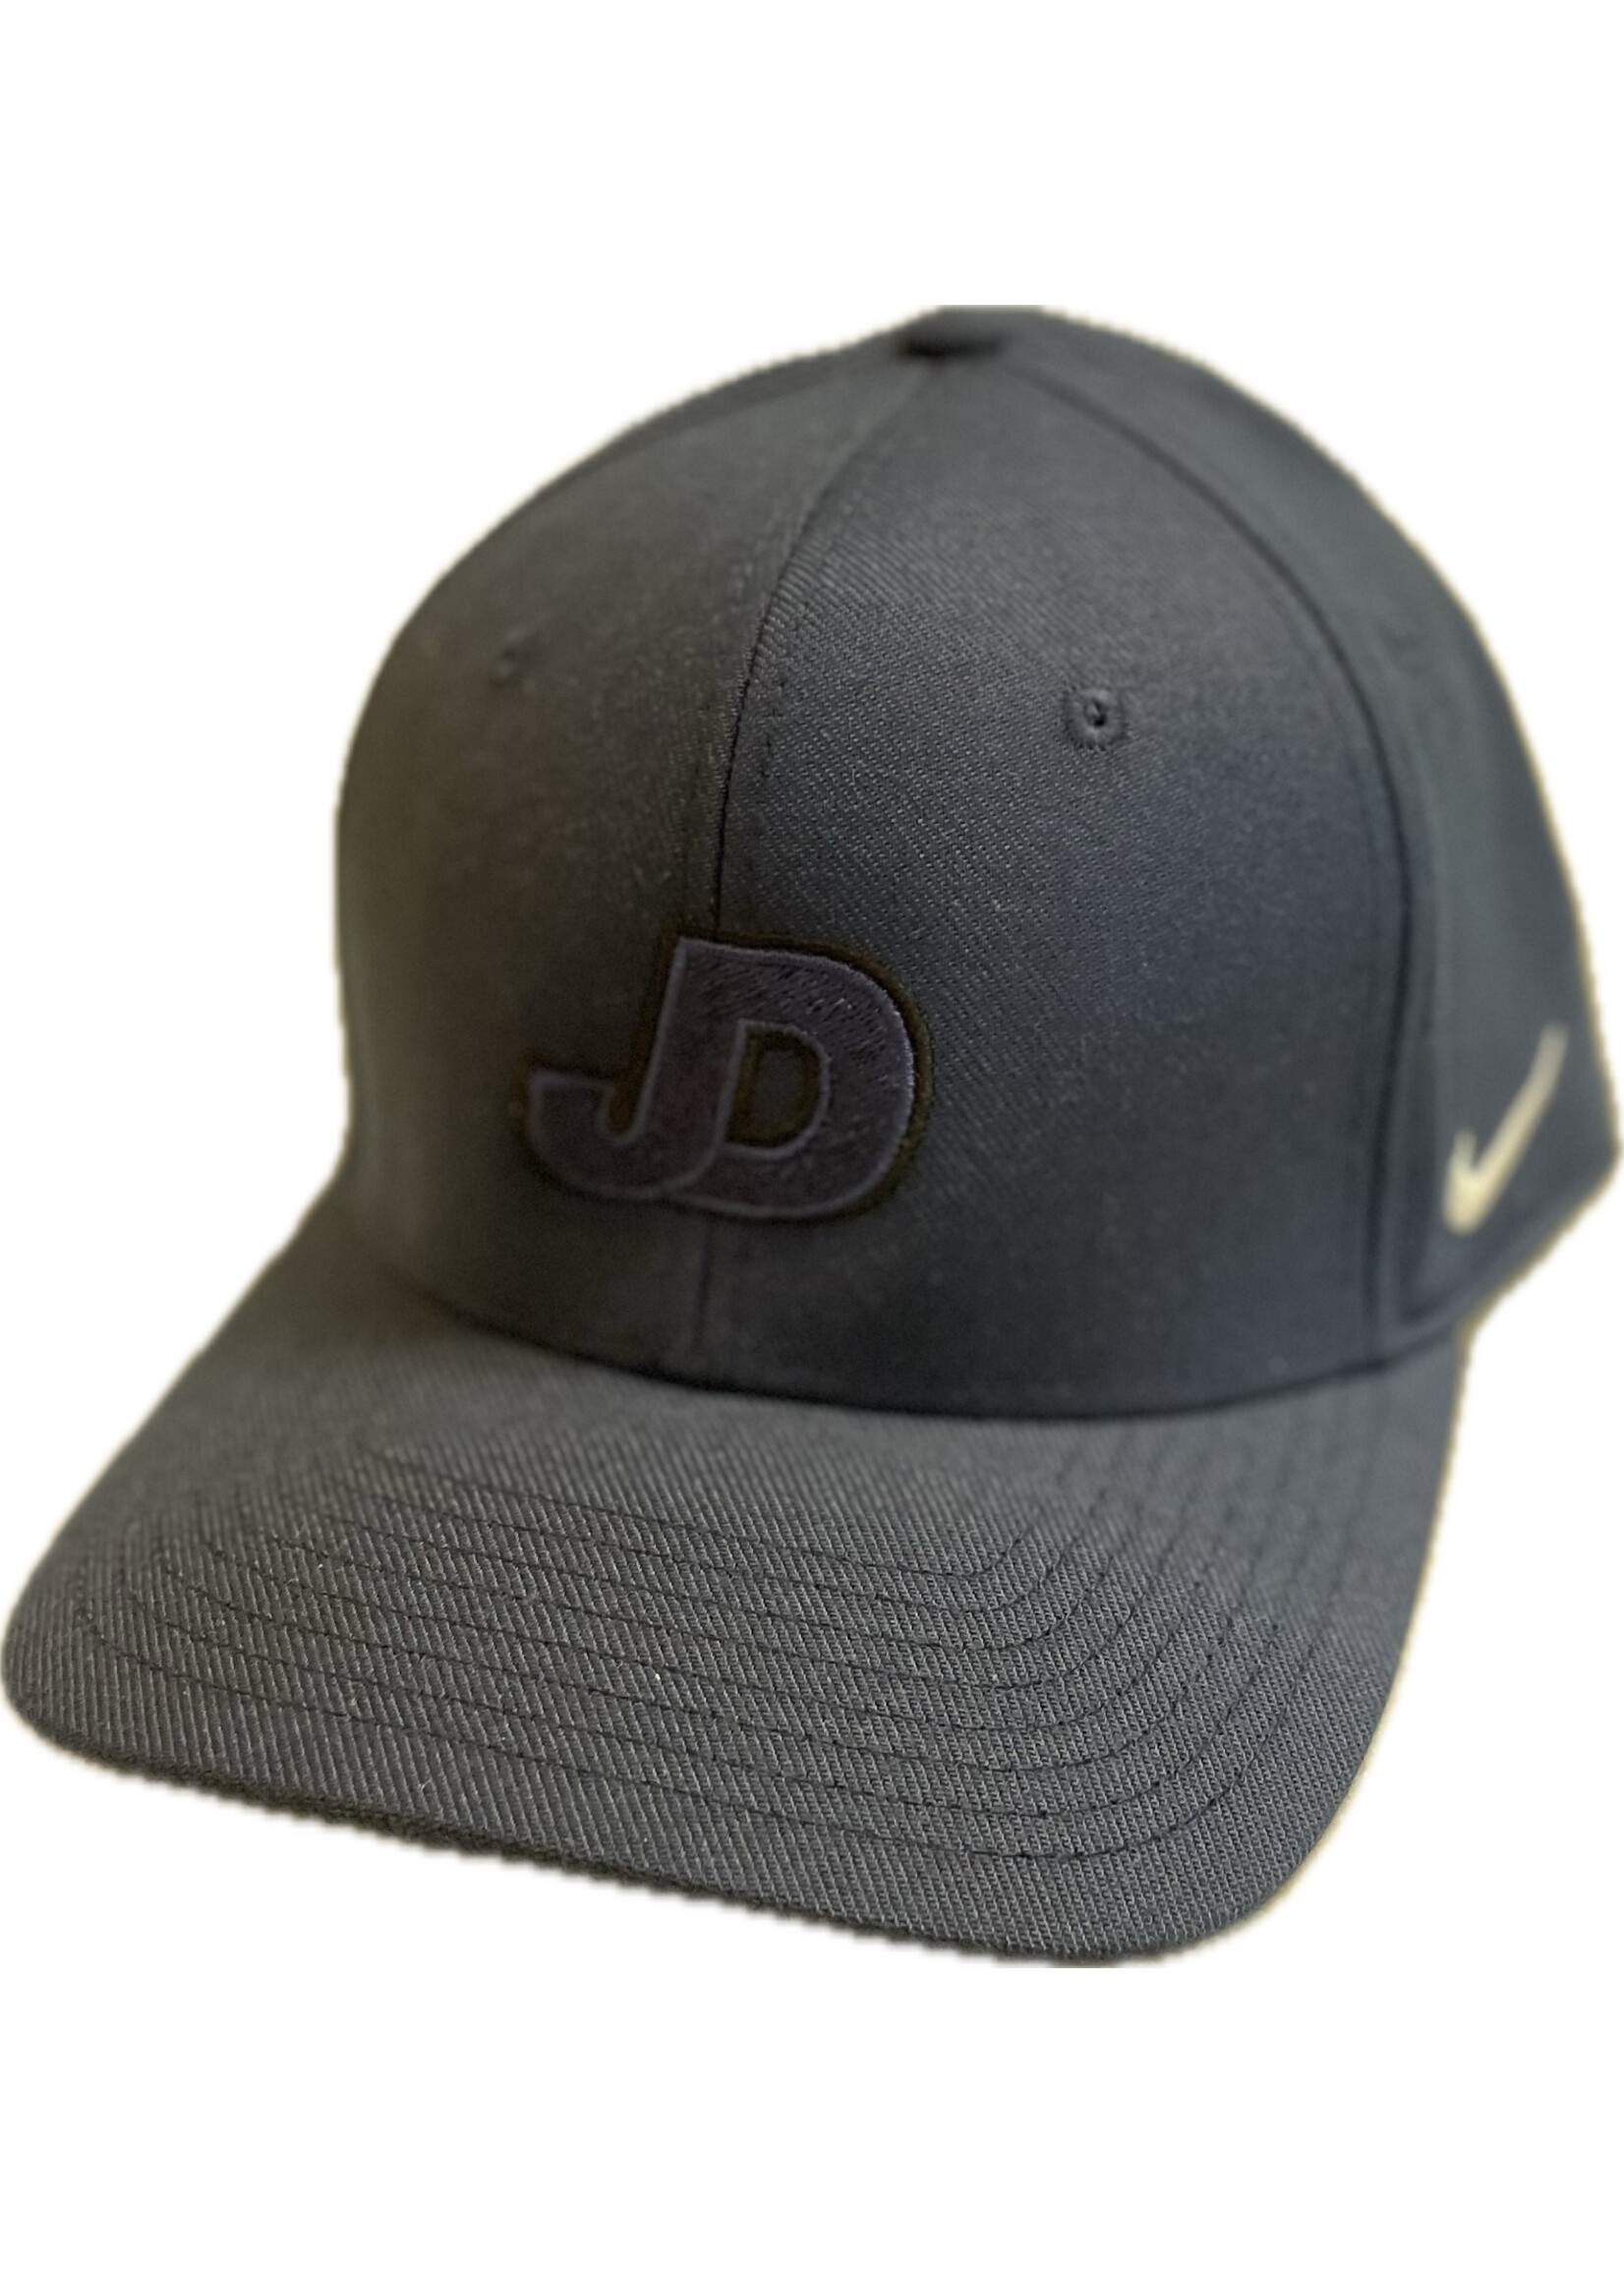 NON-UNIFORM Nike Cap - JD Fitted Hat